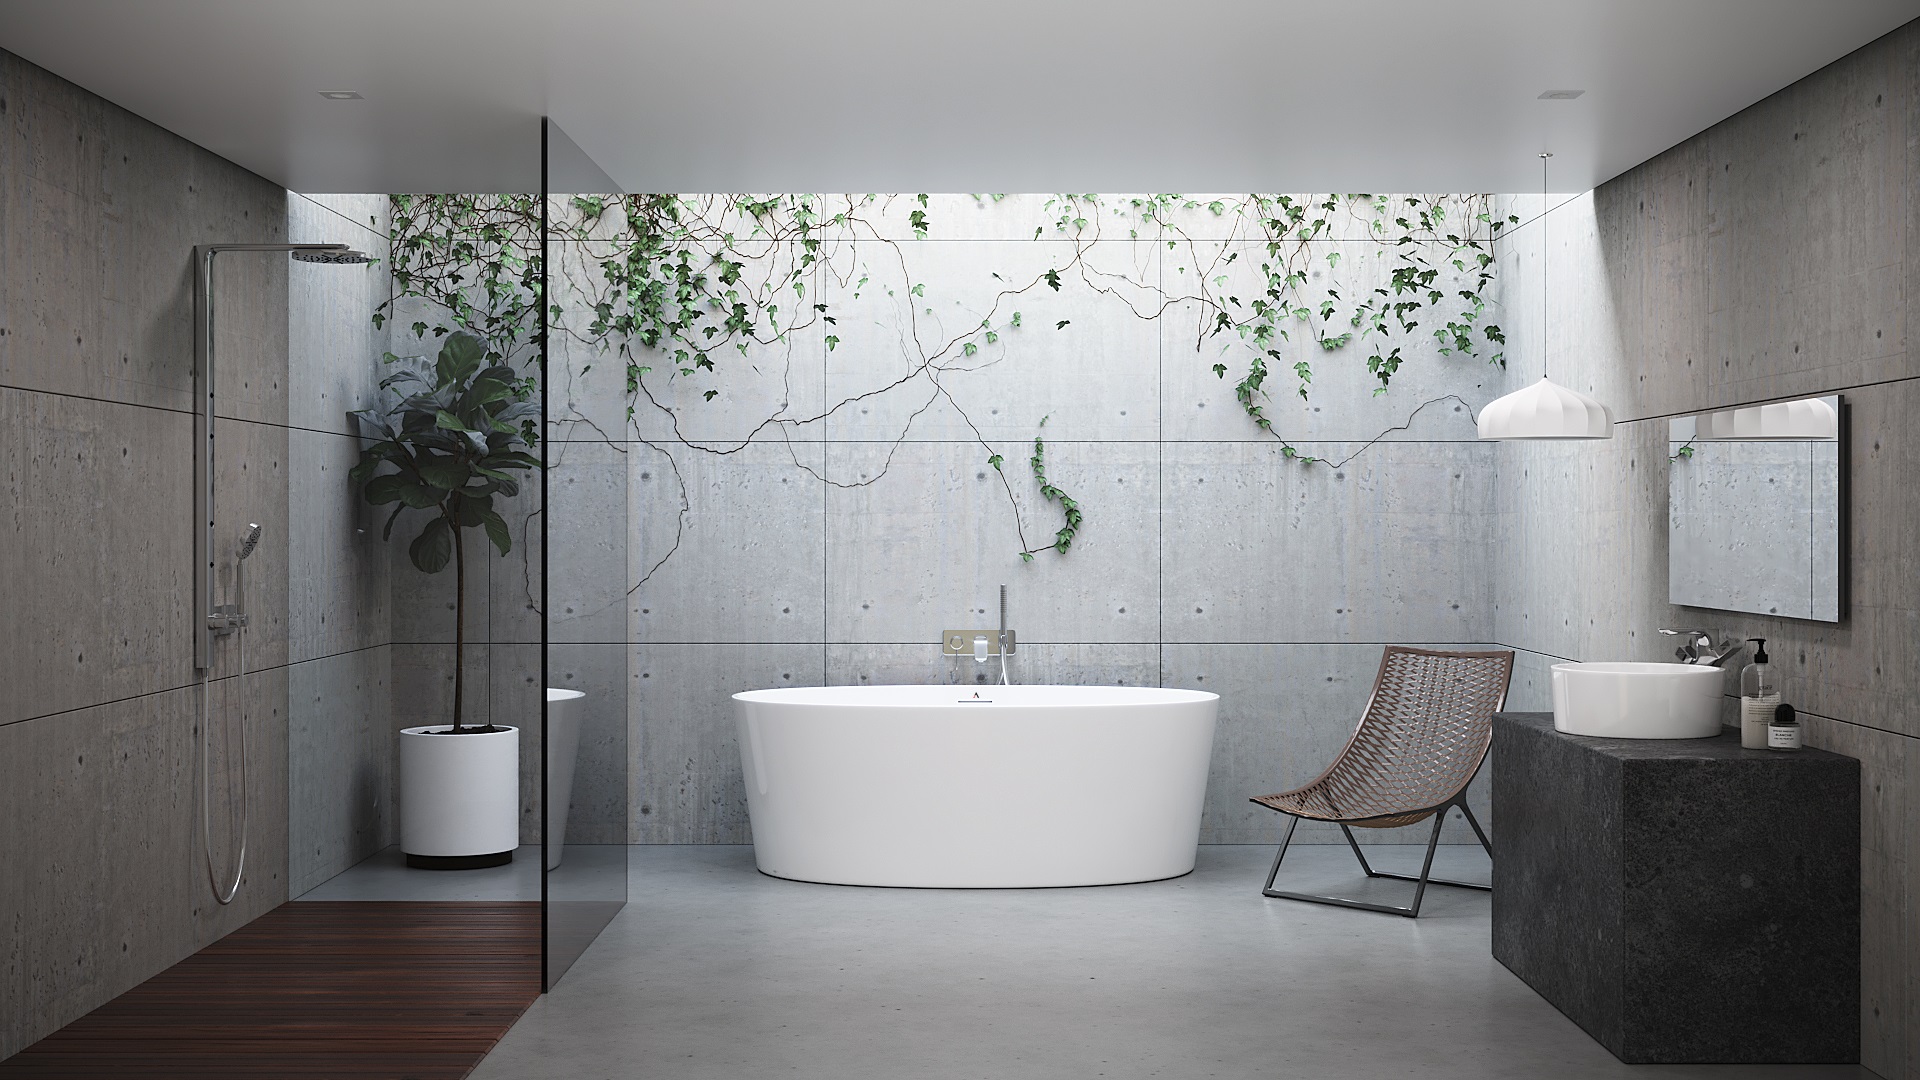 9 New Bathtubs For Homeers Clients, What Are New Bathtubs Made Of